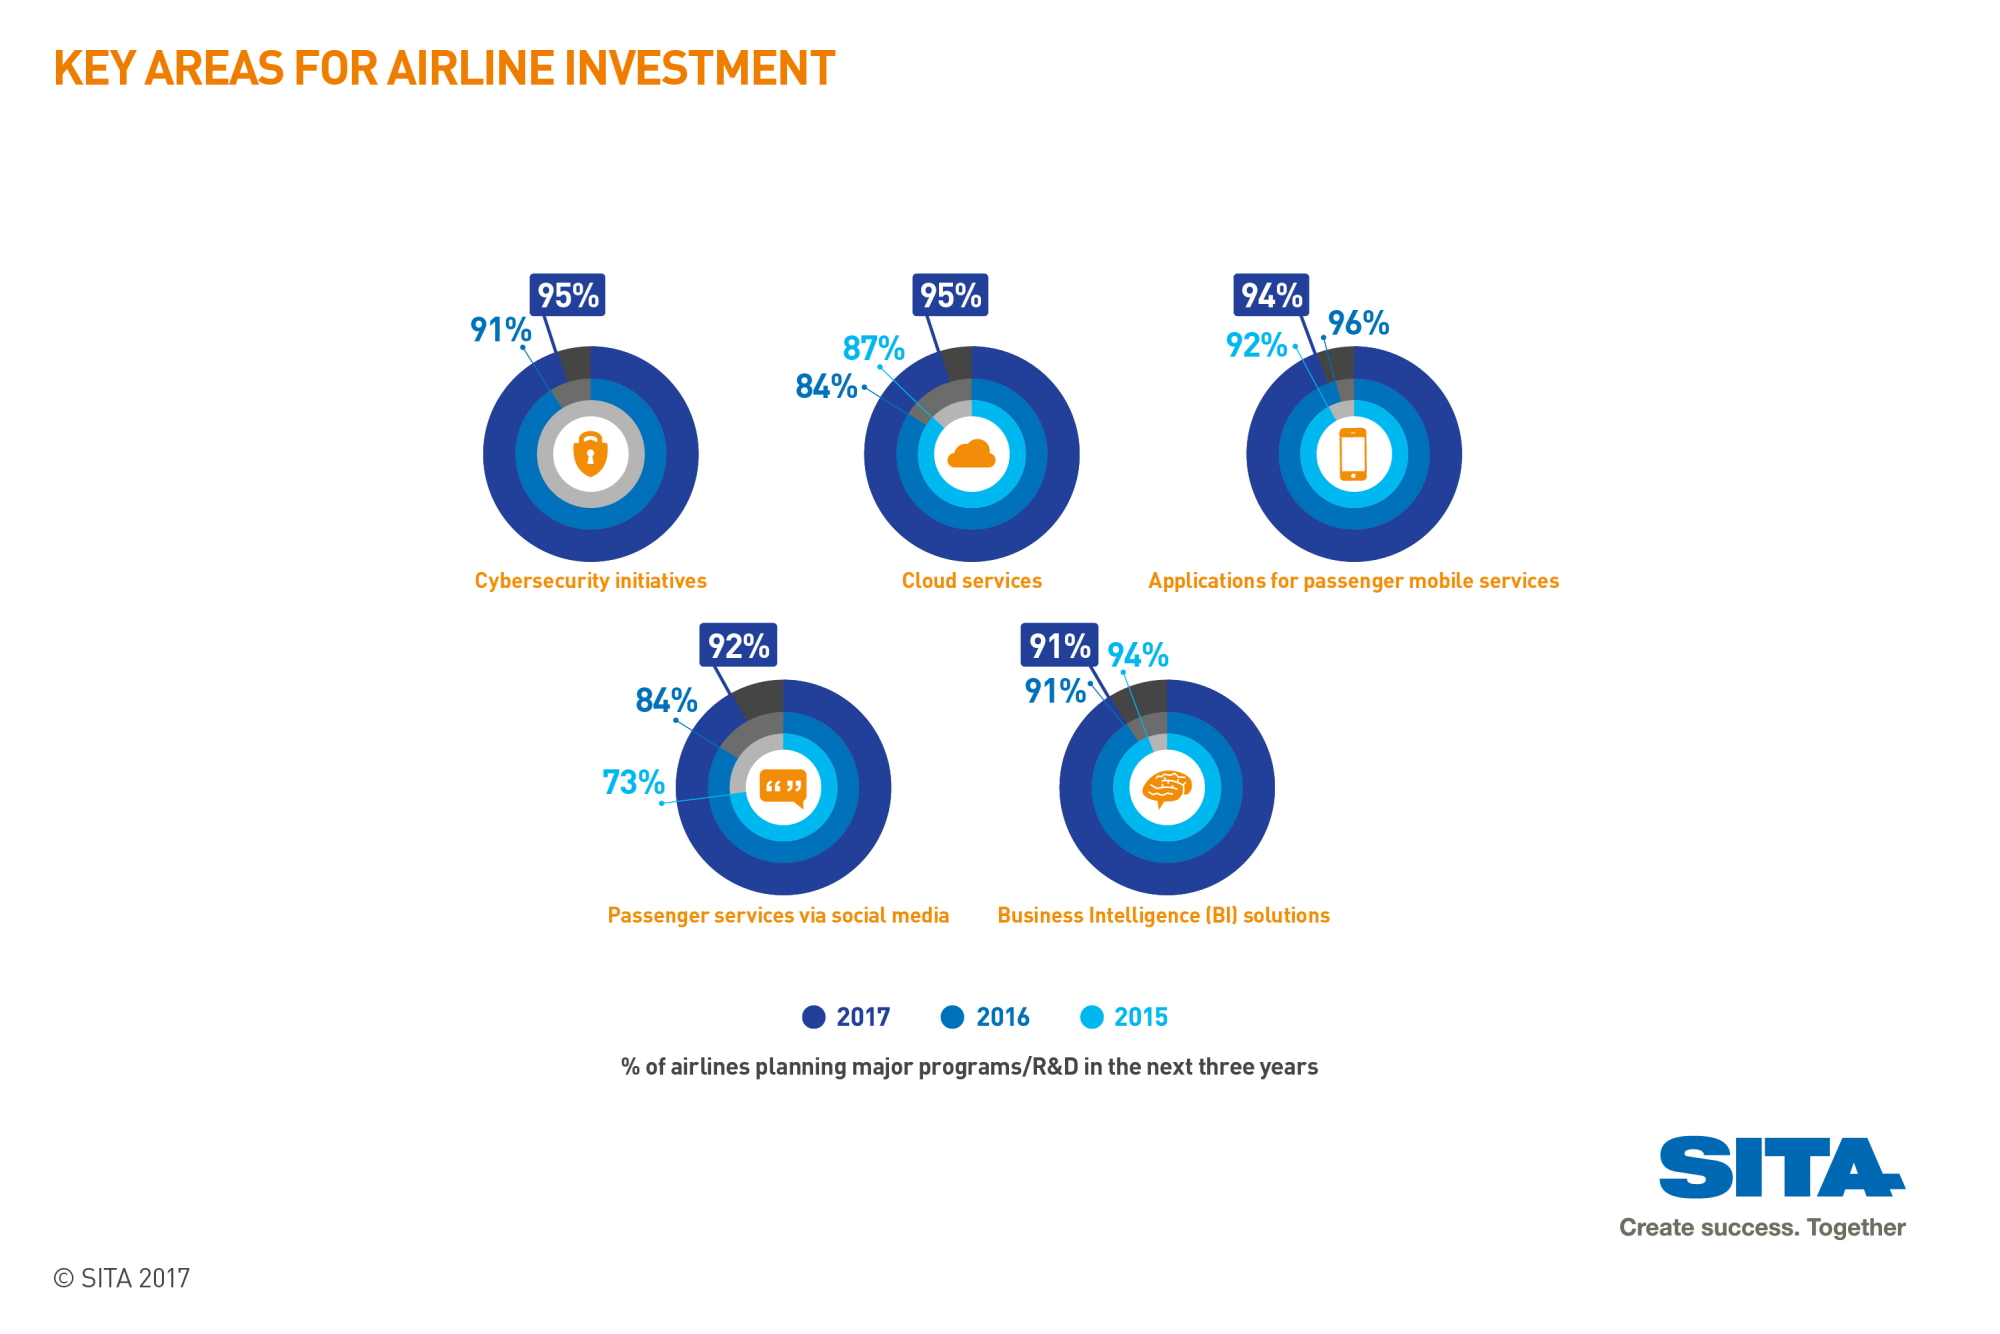 Key areas for airline investment - SITA 2017 Air Transport IT Trends Insights. Click to enlarge.